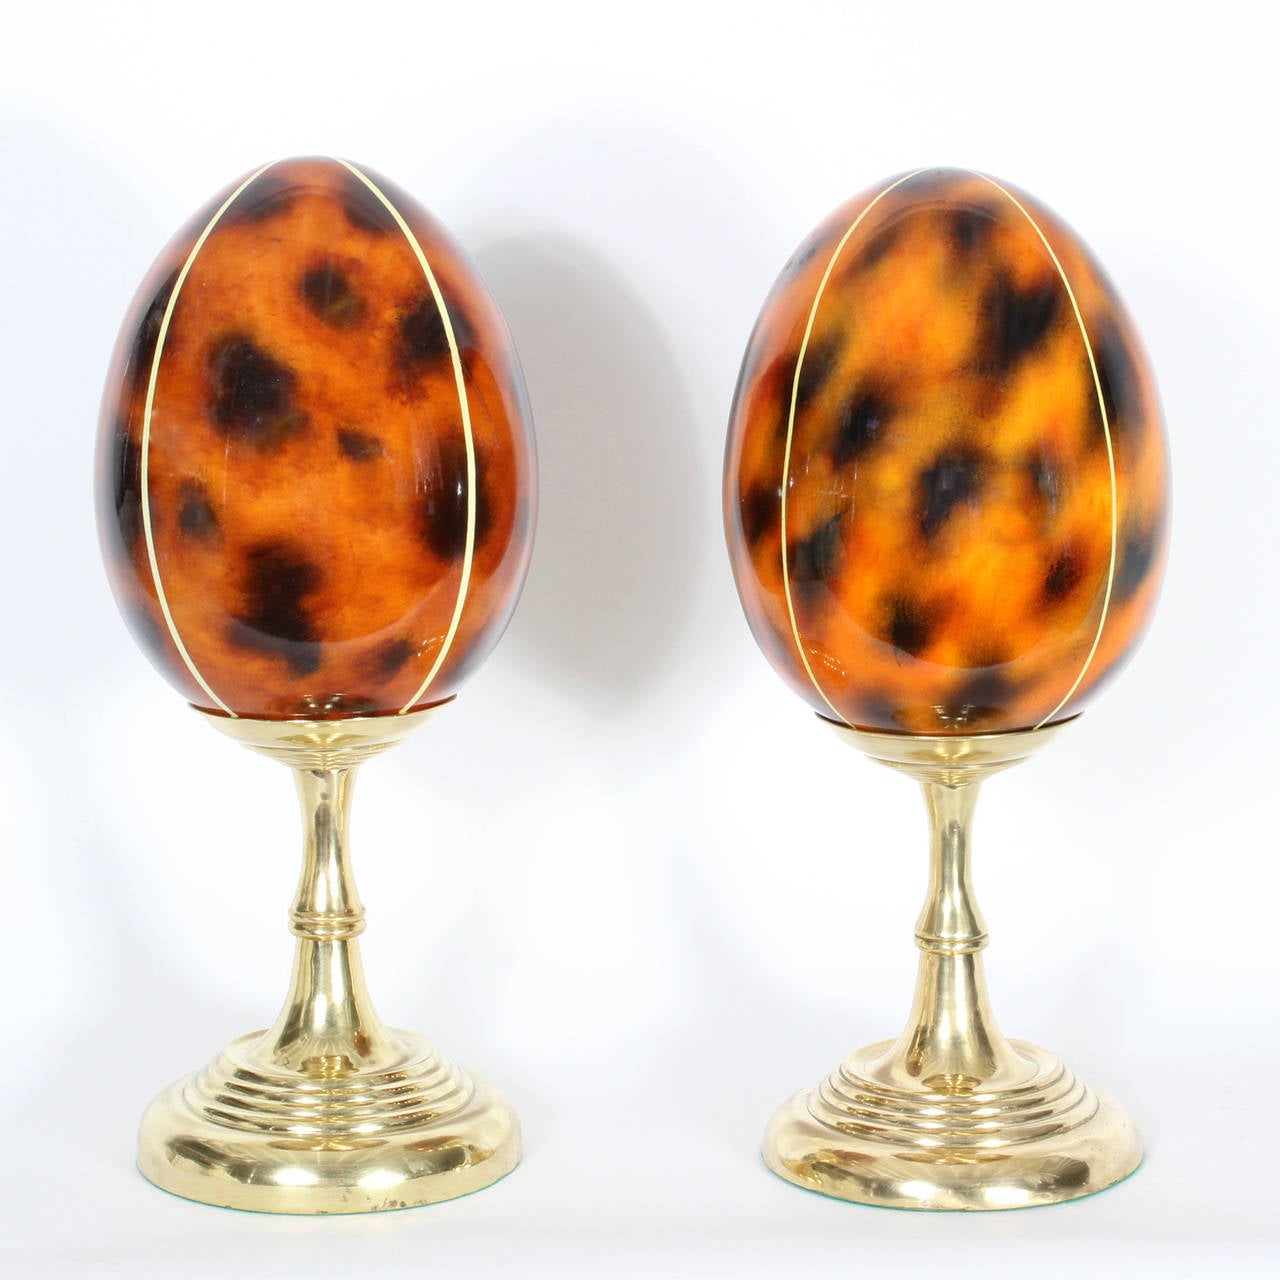 A pair of faux tortoise lacquered egg shaped objects de arte on solid brass turned pedestals, with a candlestick vibe. No home is complete without them.
Possibly by Maitland - Smith. Newly polished.

 